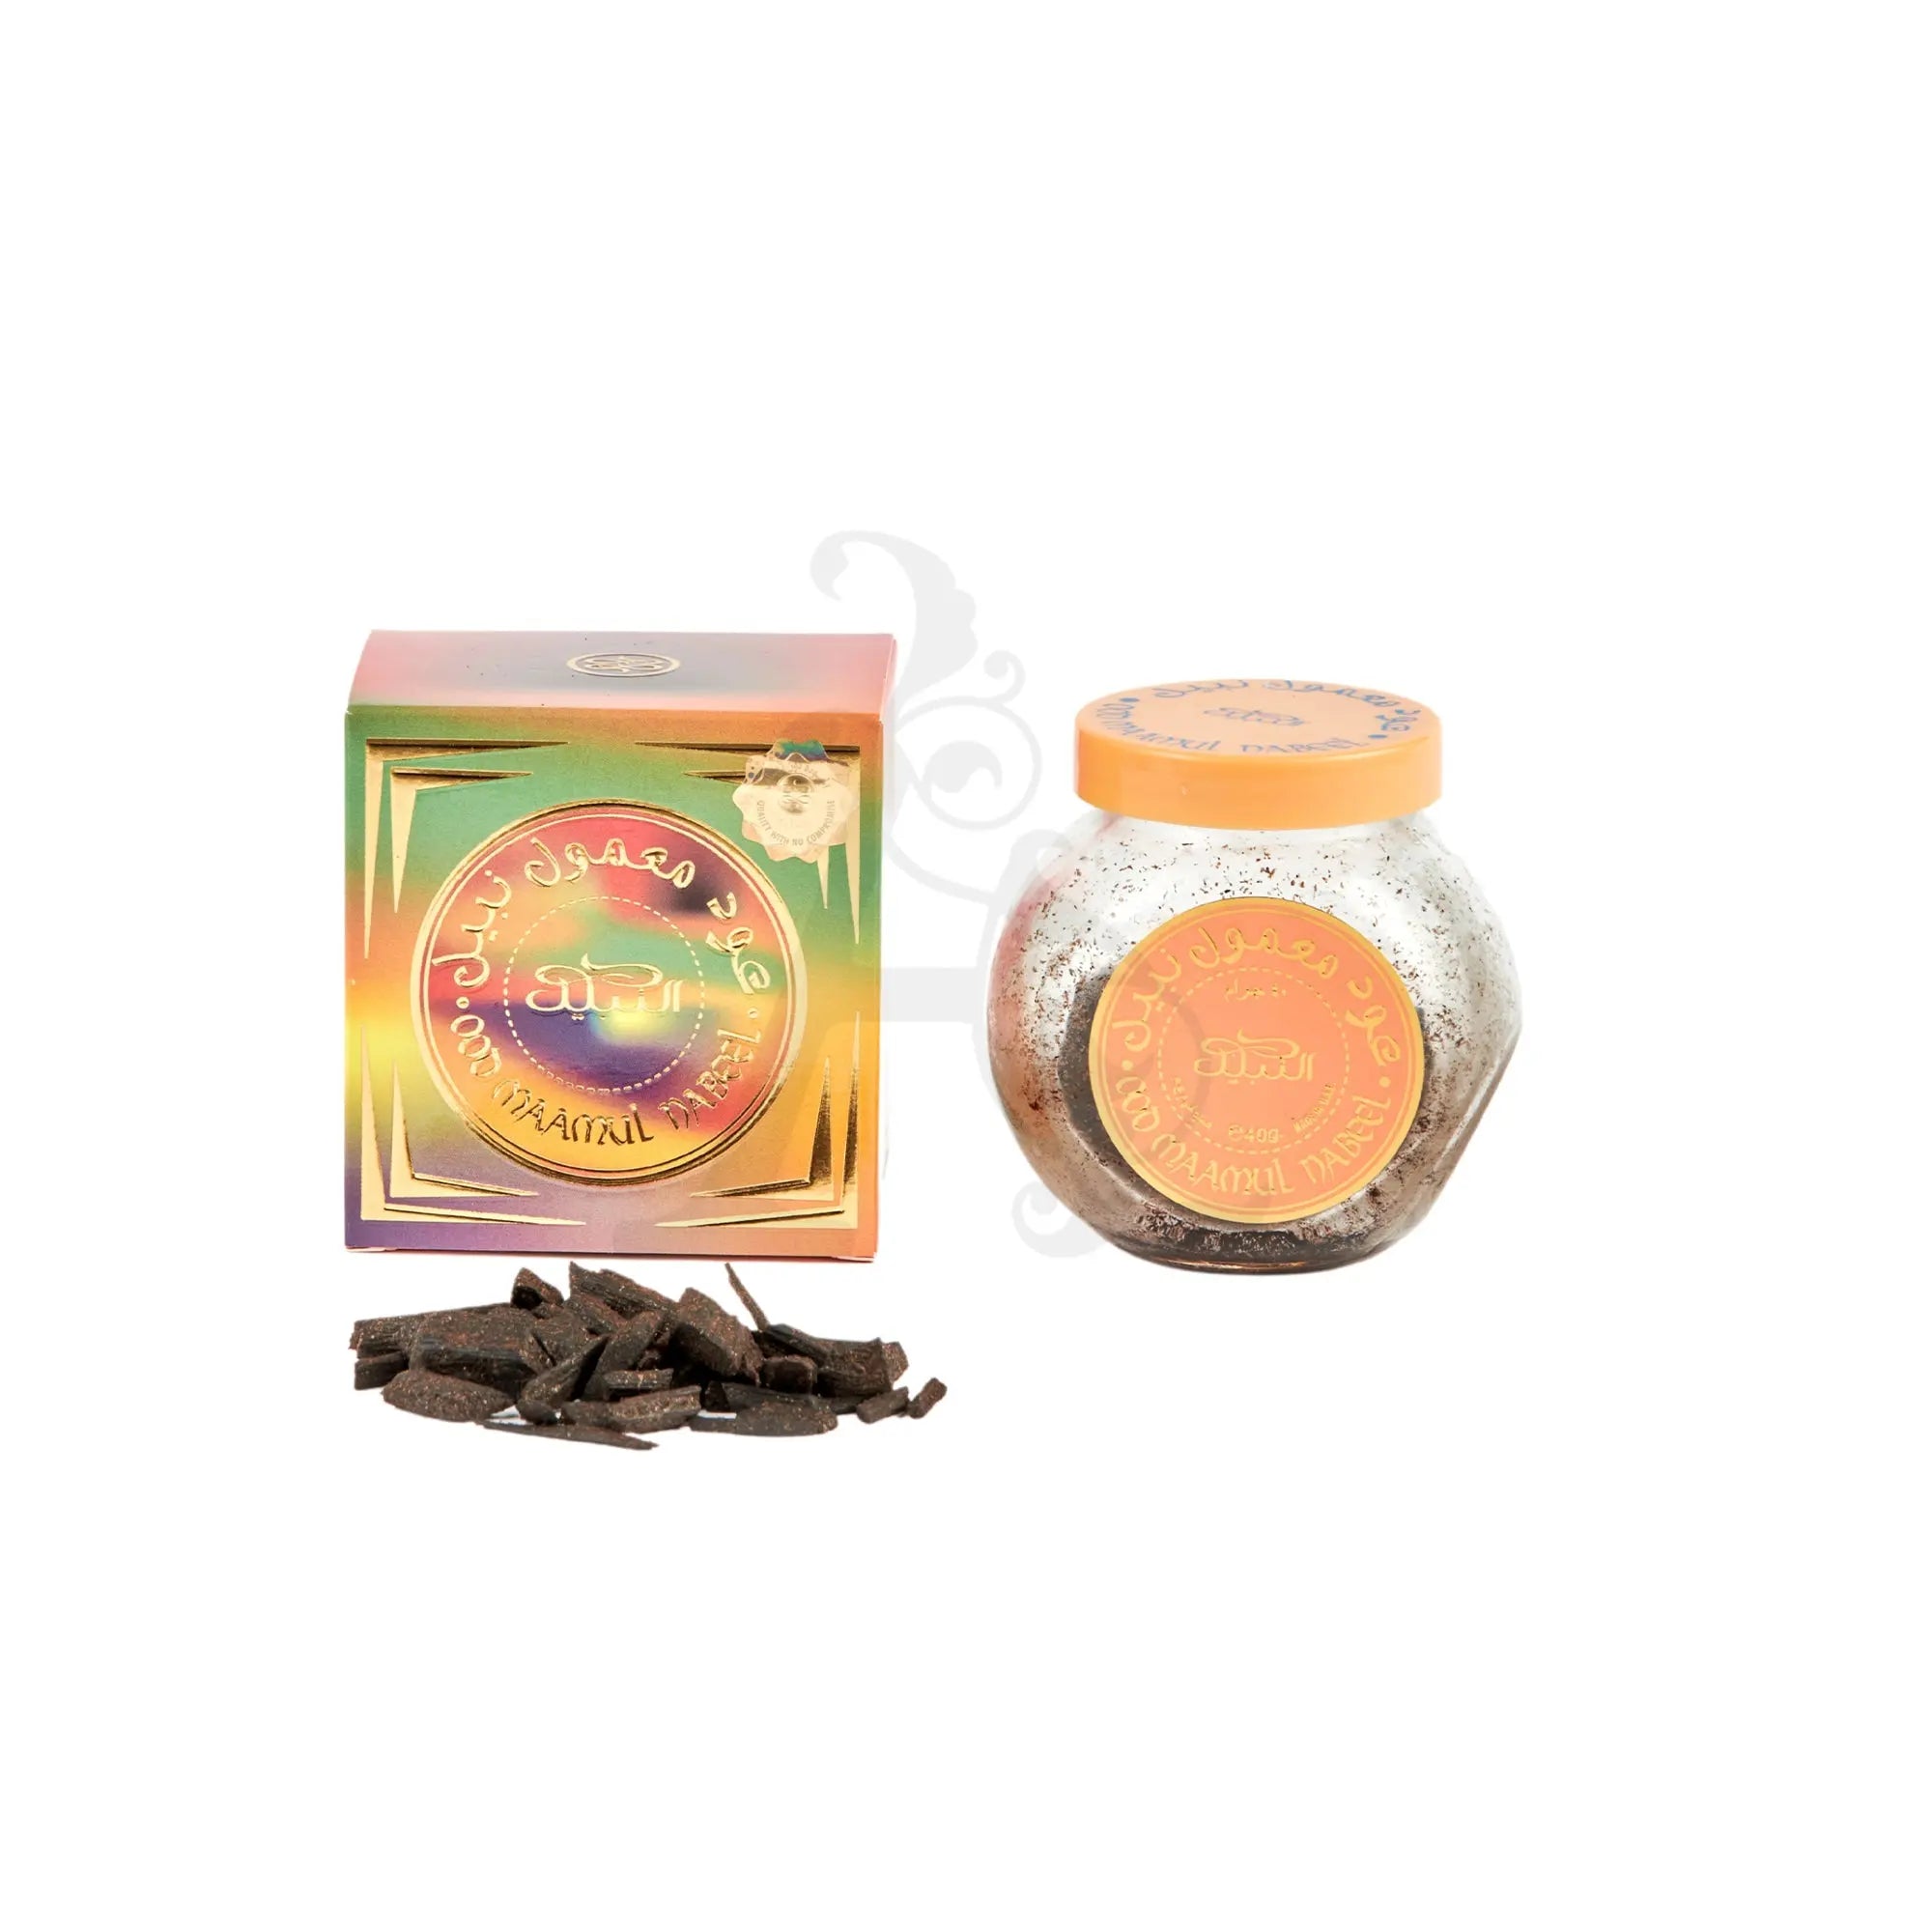 The image displays a product set from Nabeel Perfumes, consisting of Oud Ma'amoul Bakhoor. On the left, there's a holographic box with a square shape and the Nabeel logo in Arabic and English, along with decorative elements that suggest a premium quality product. To the right, there's a glass jar with a metallic orange lid, labeled in Arabic and English with the Nabeel brand, indicating it contains the bakhoor.